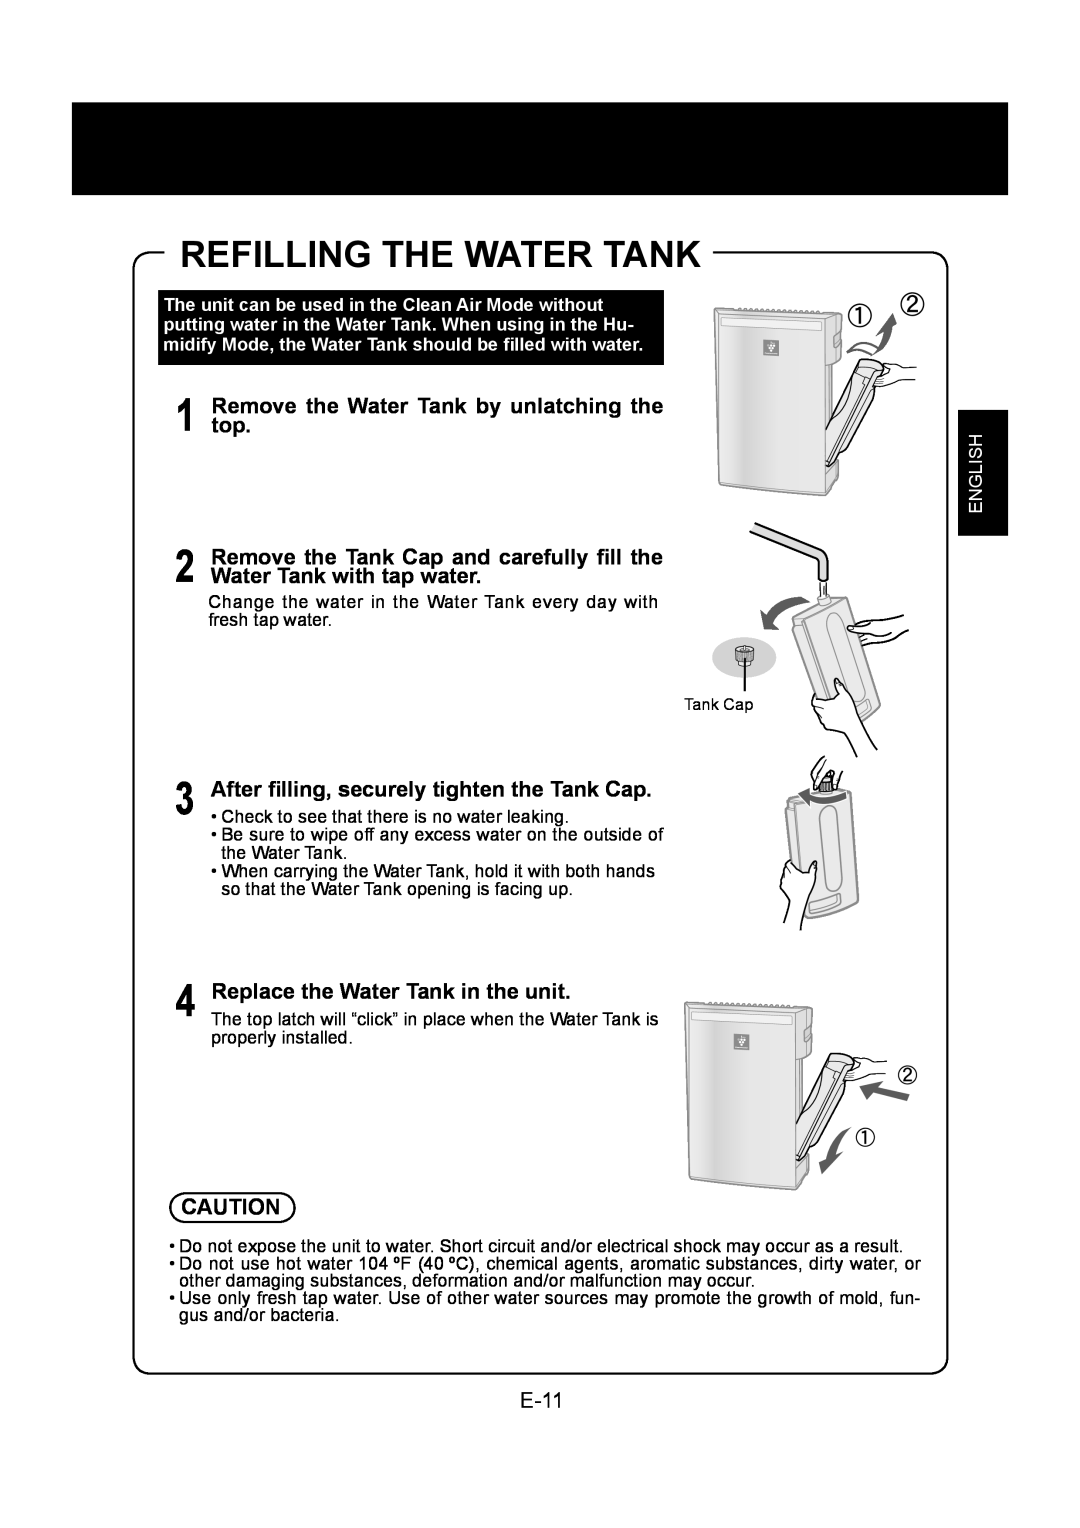 Sharp KC-830U operation manual Refilling The Water Tank, E-11, Remove the Water Tank by unlatching the top, English 